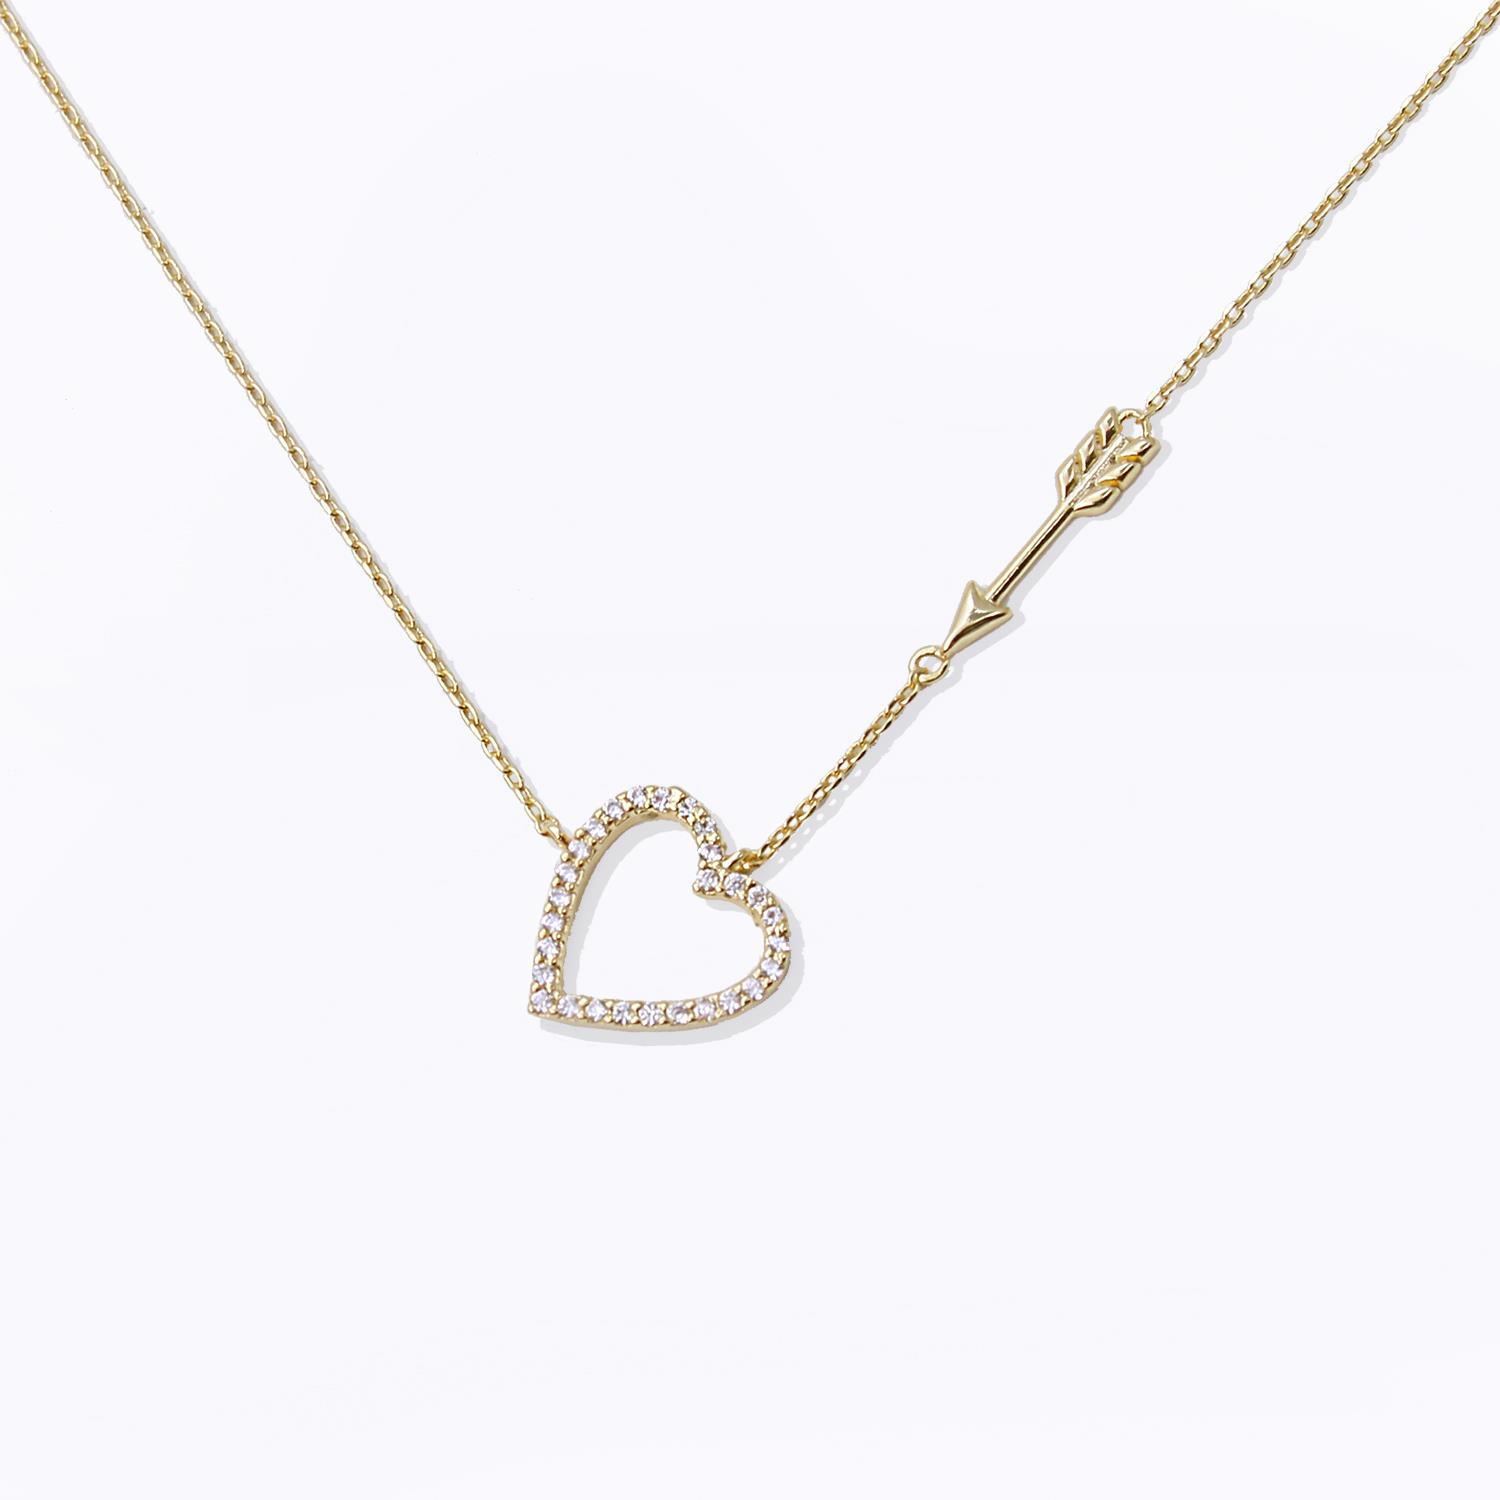 18K GOLD RHODIUM DIPPED CUPID ARROW NECKLACE